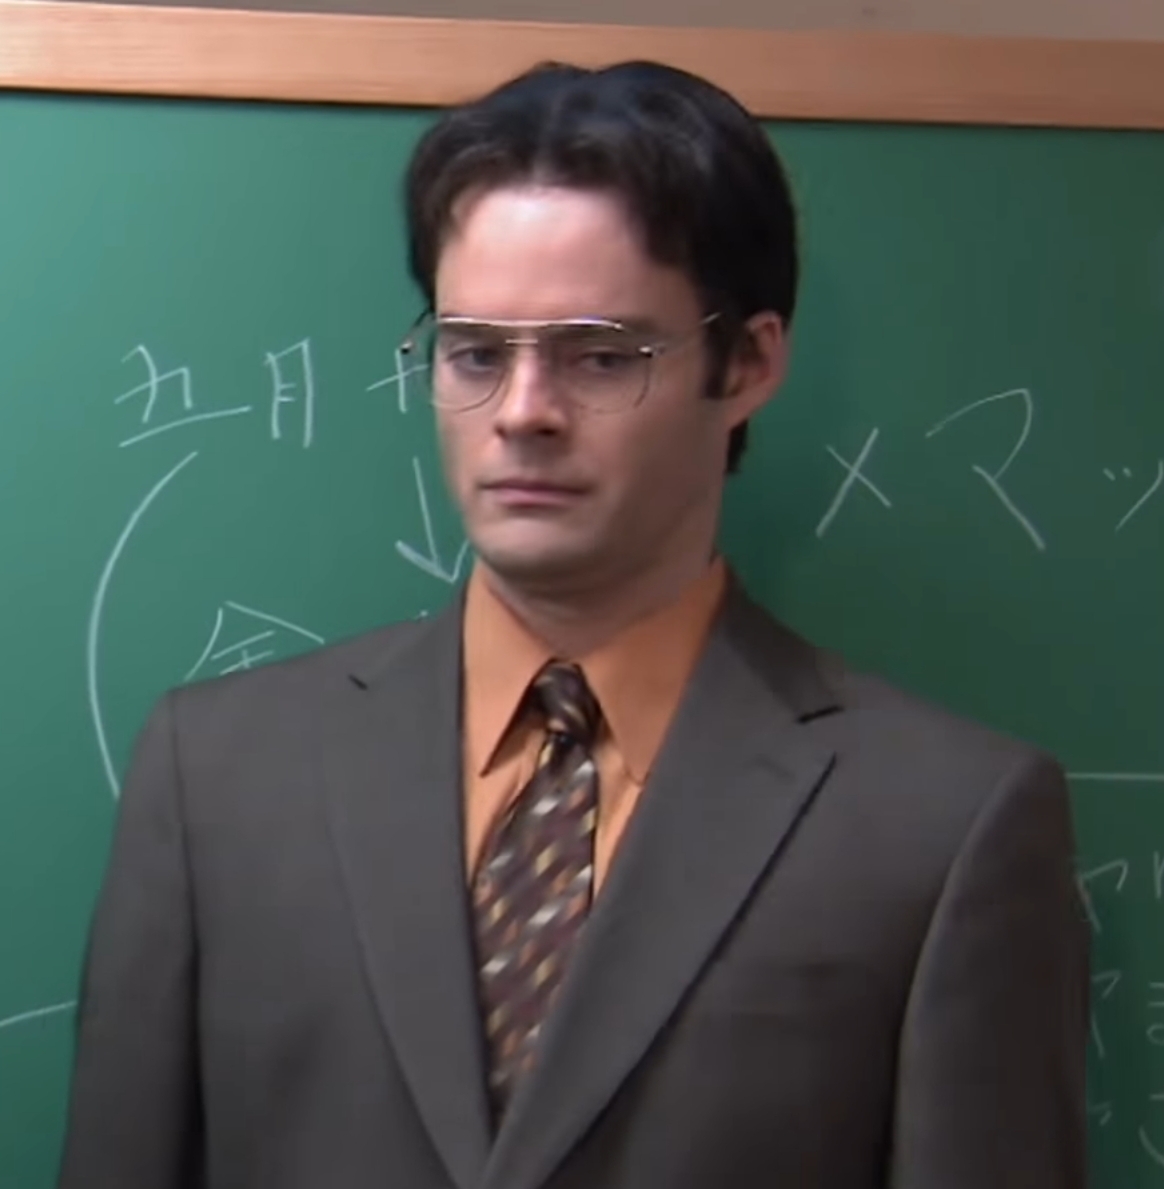 I feel like Bill Hader would've been the 2nd best possible choice for